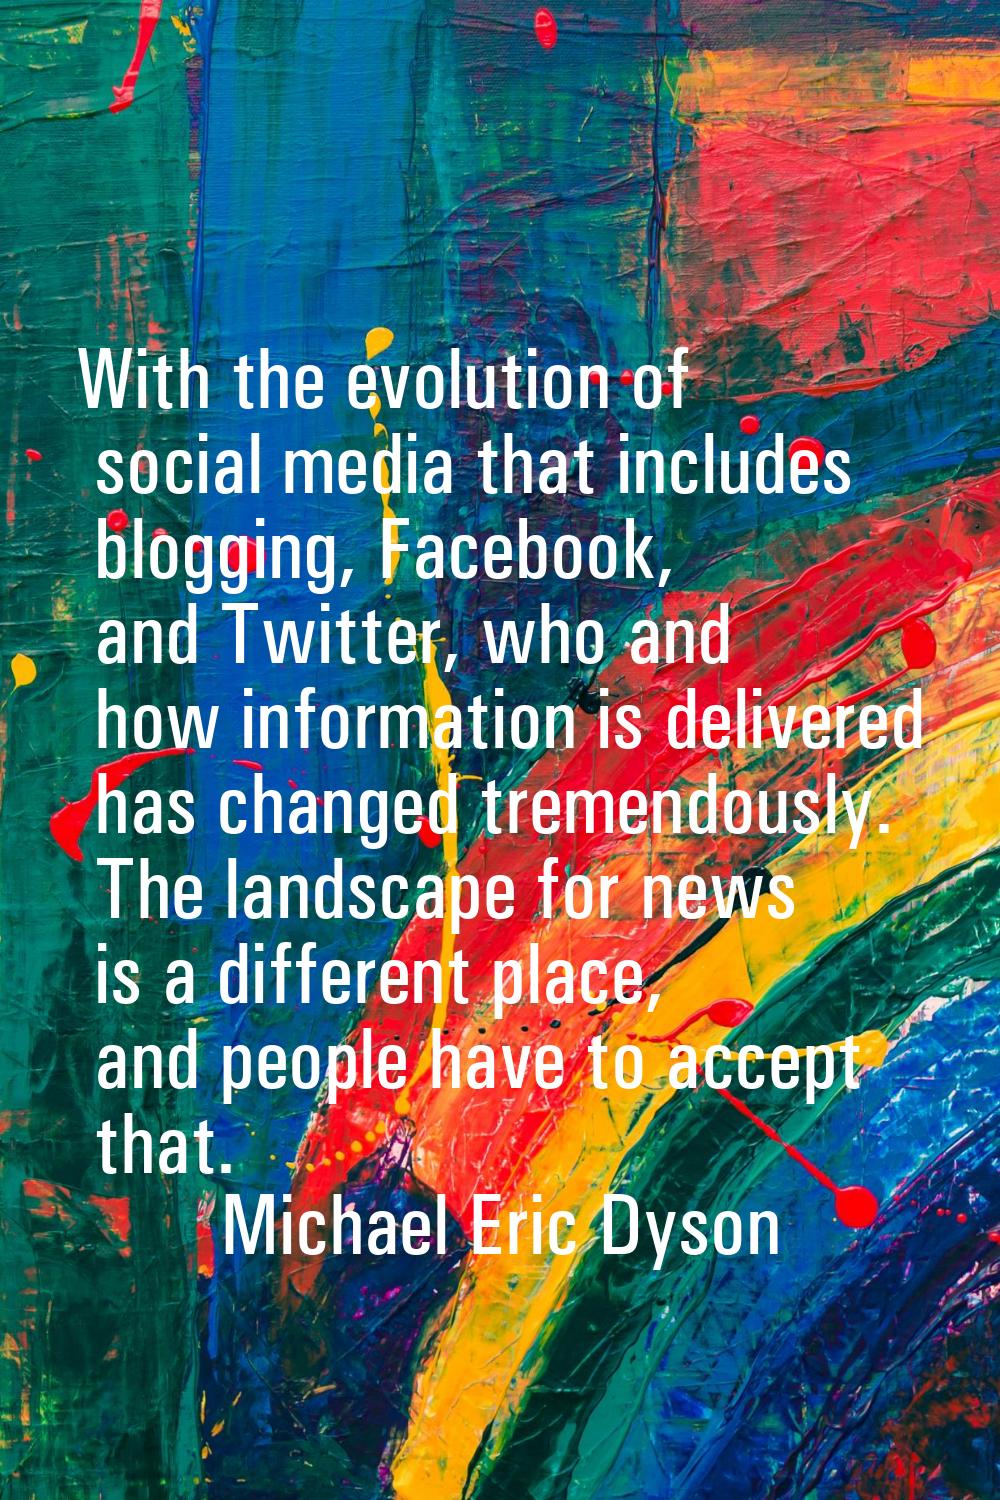 With the evolution of social media that includes blogging, Facebook, and Twitter, who and how infor